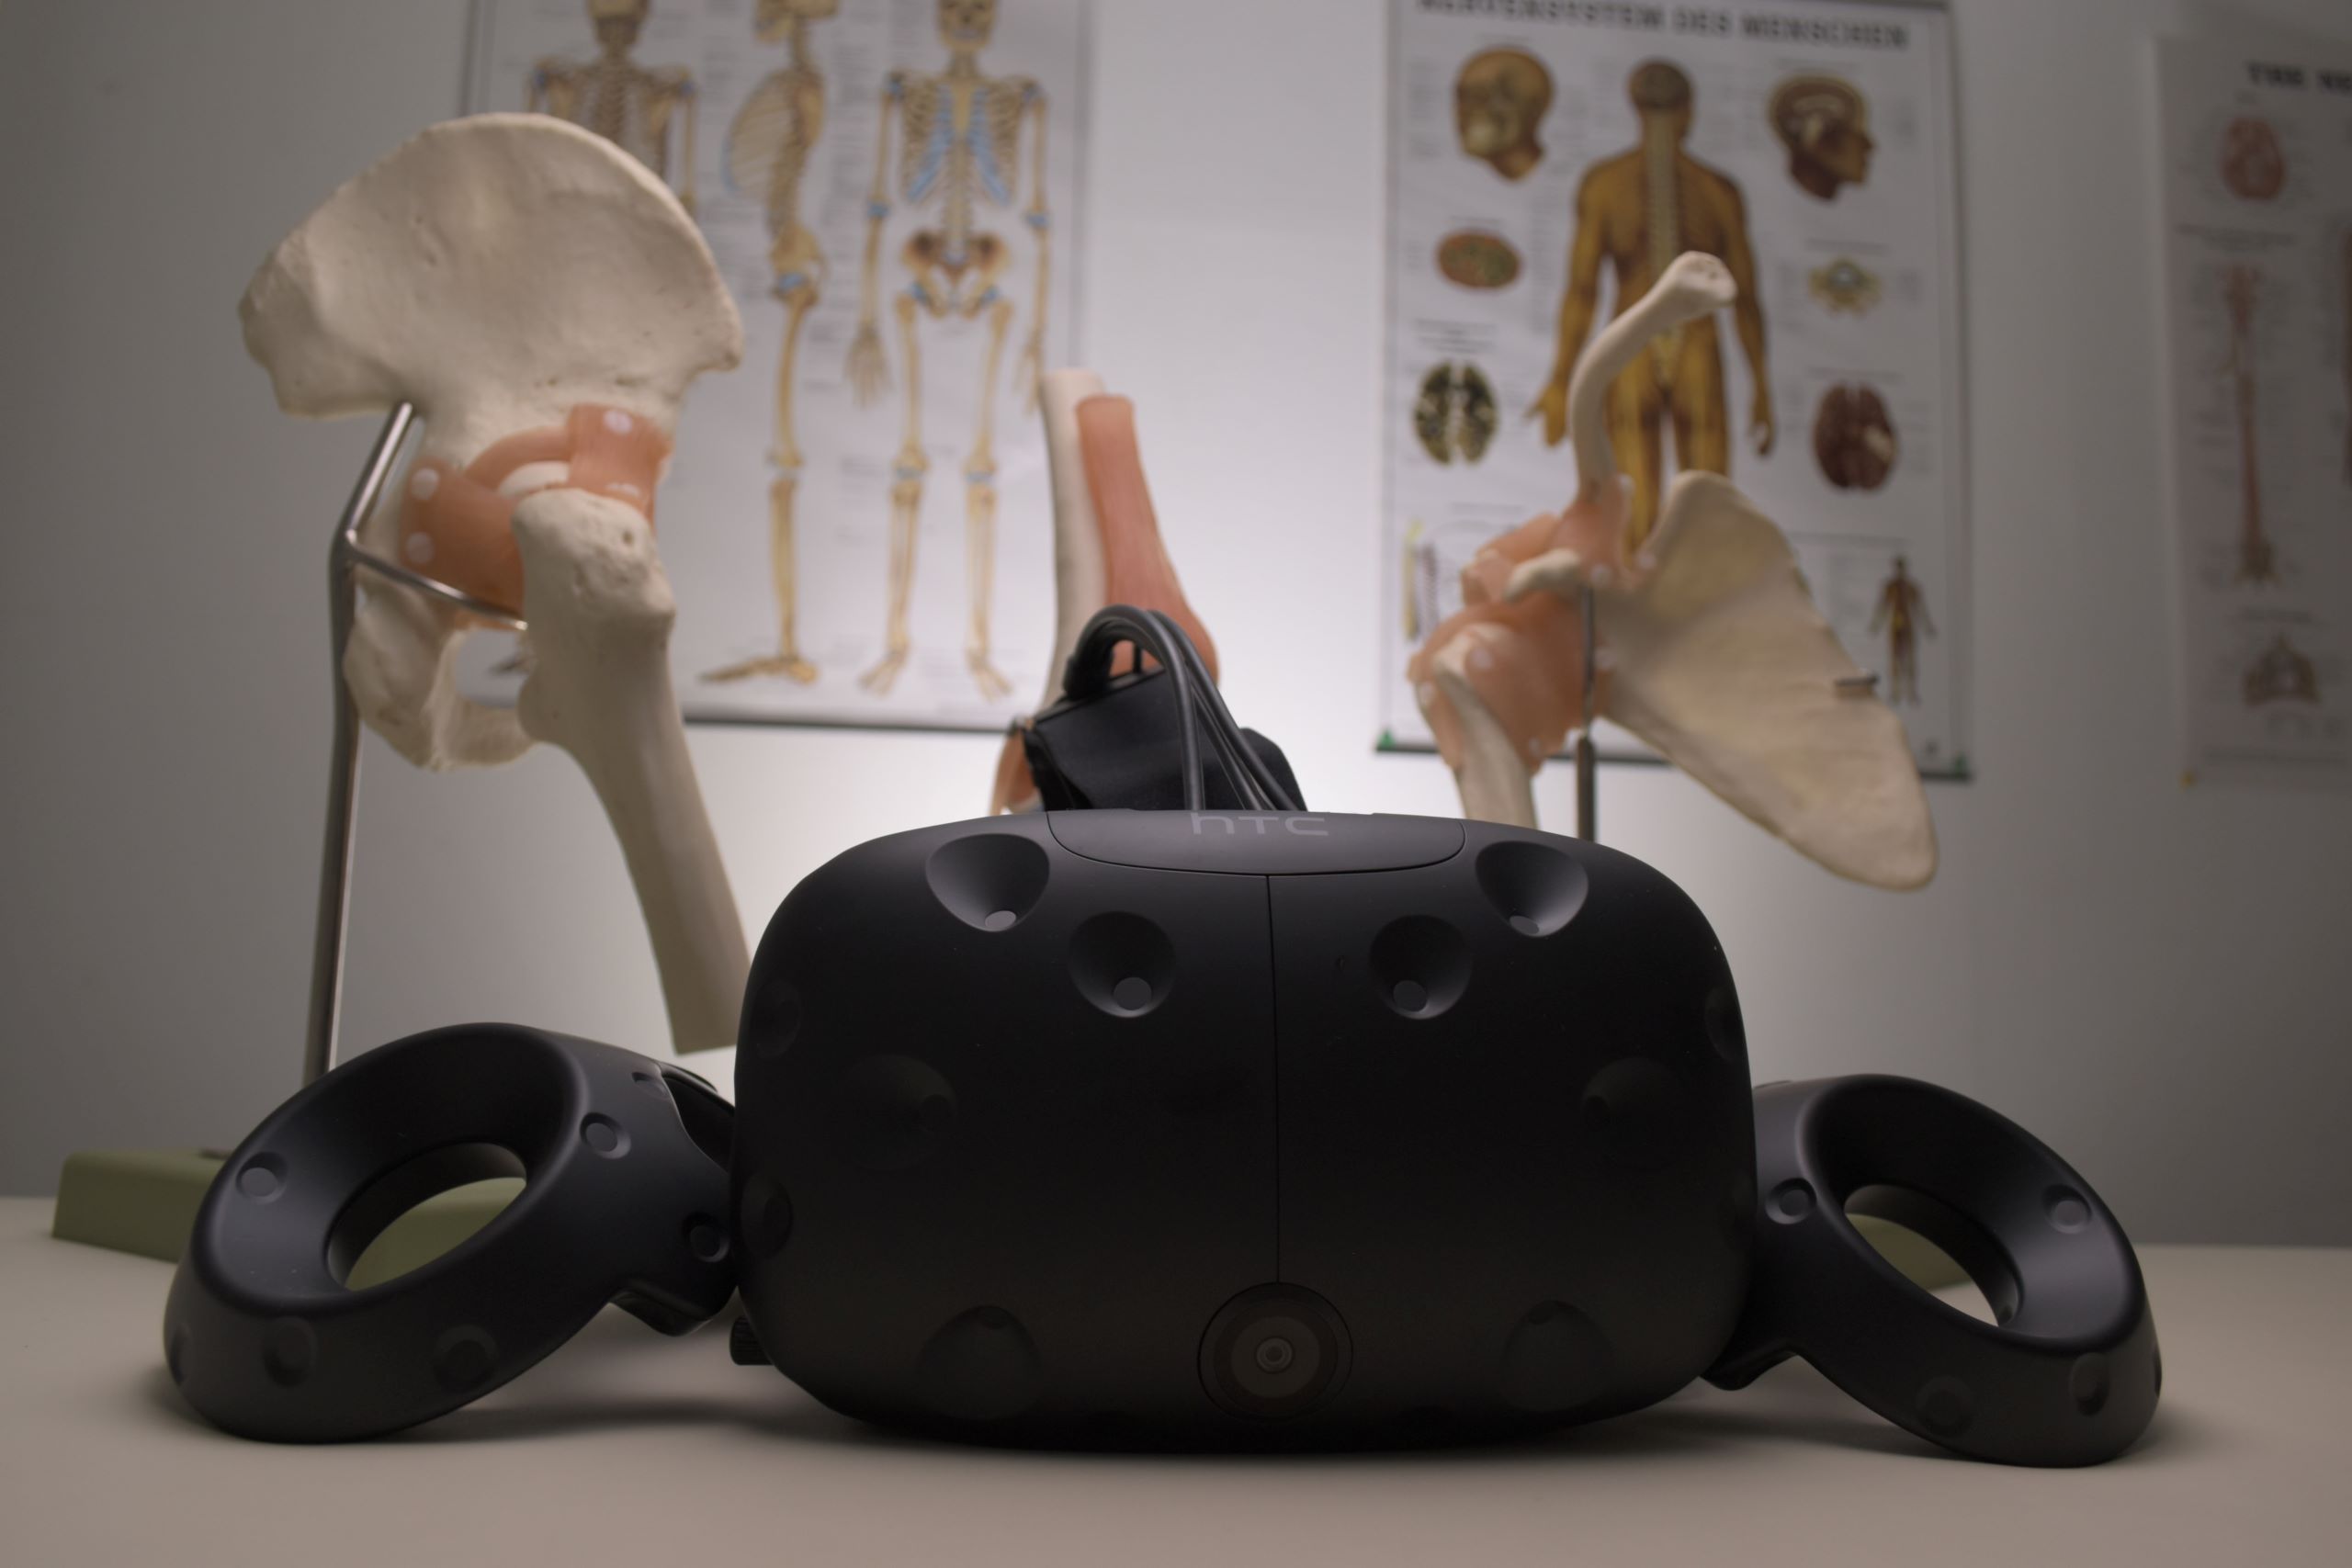 Loan your VR headset to your surgeon, you'll reap the benefits